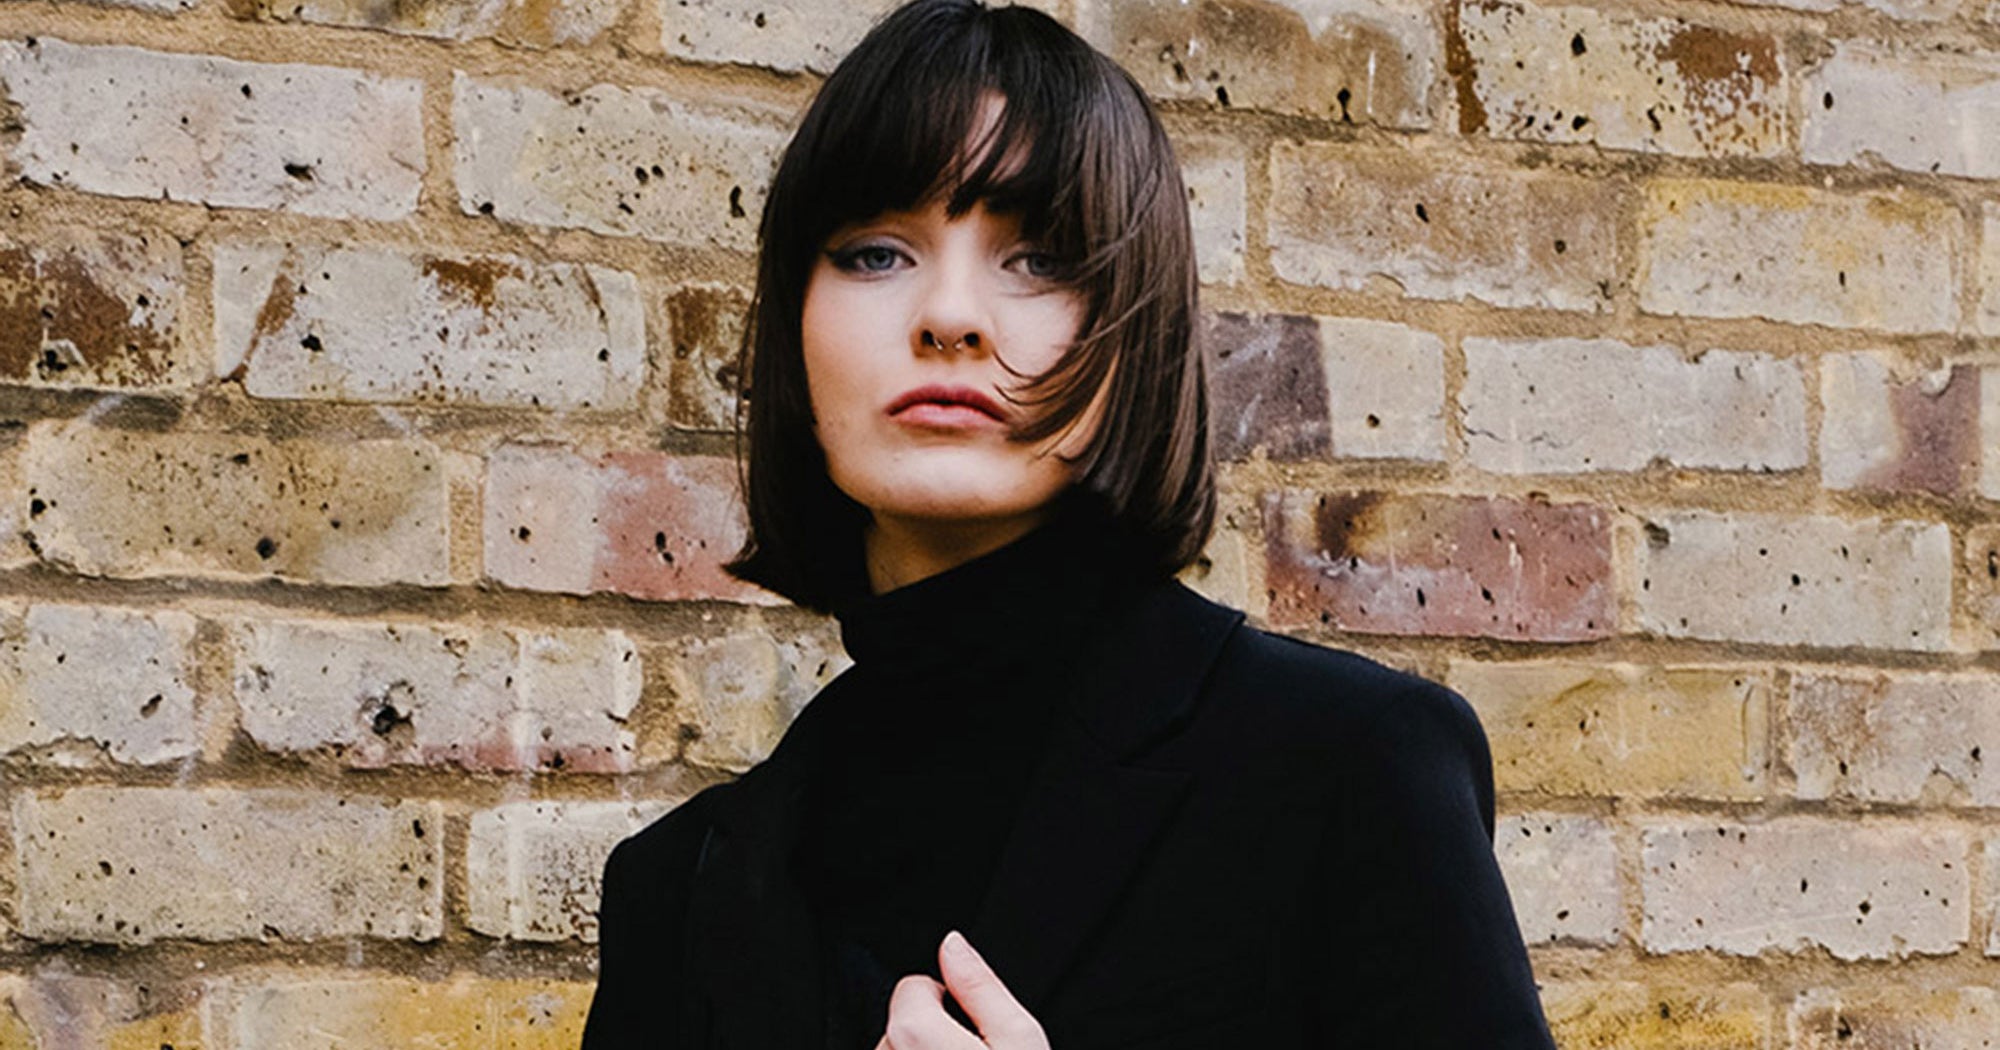 21 Best Street Style Haircut Trends From London Fashion